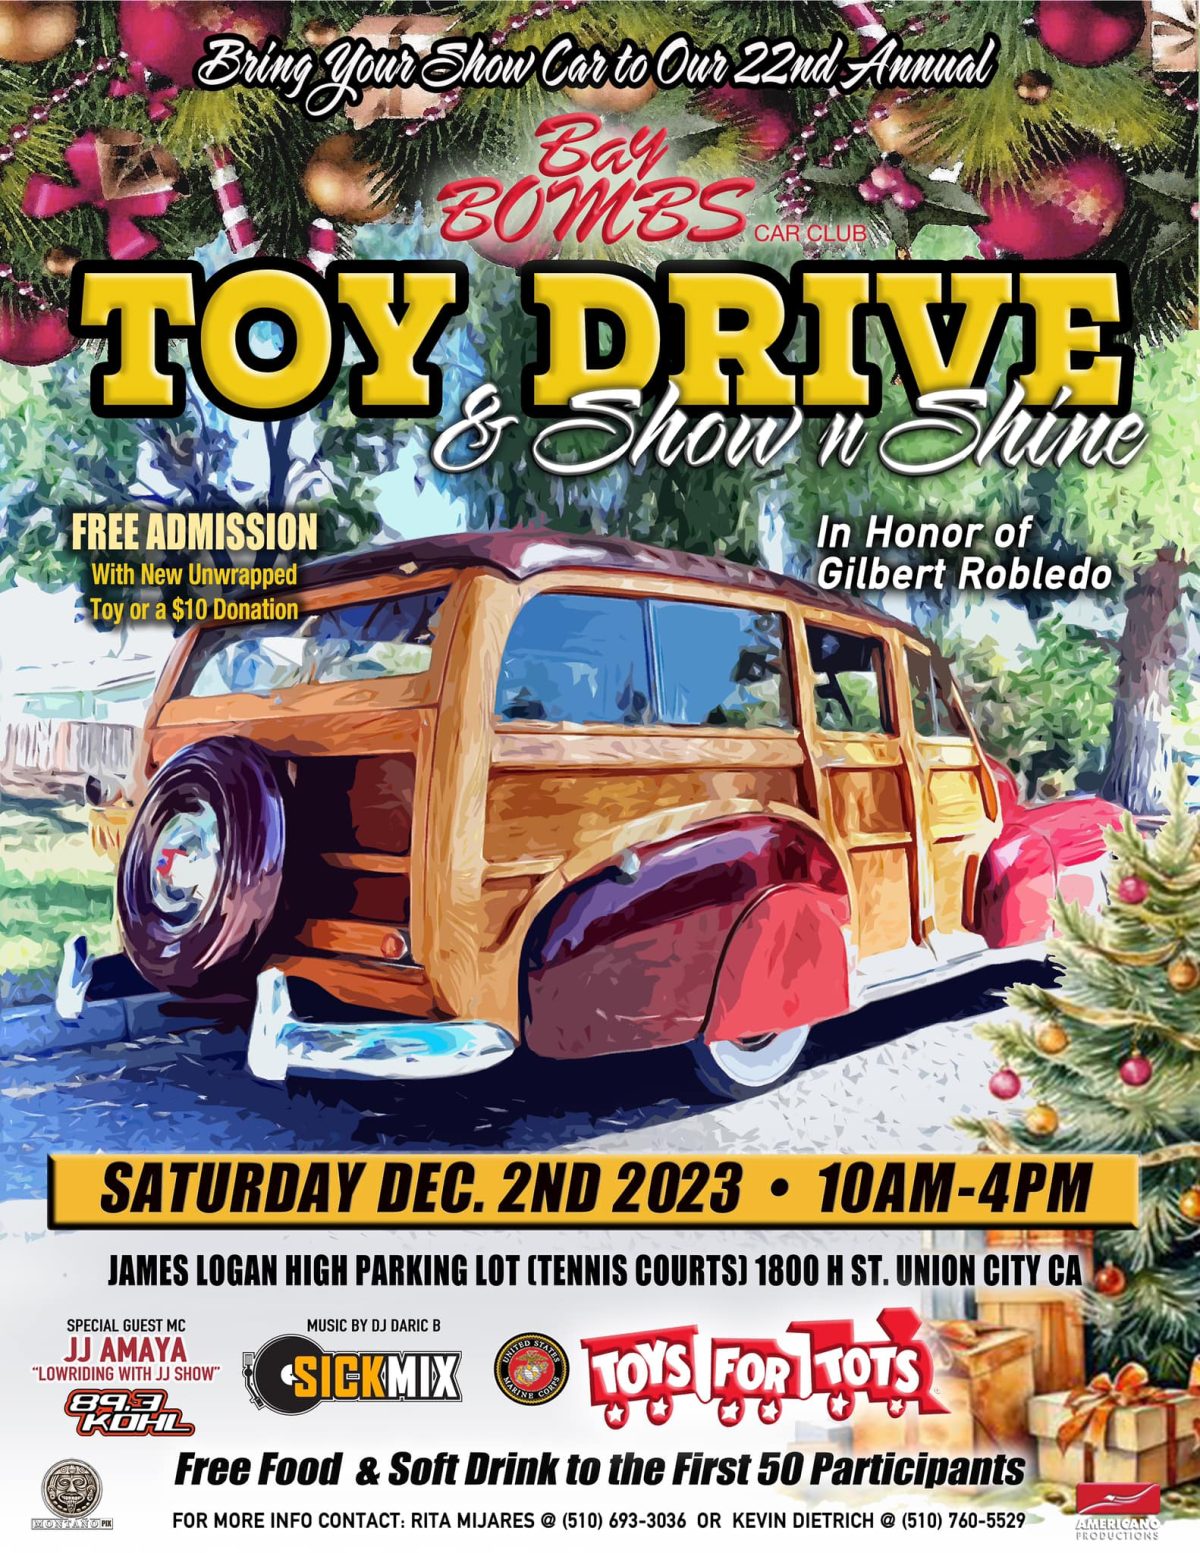 Bay Bombs Toy Drive